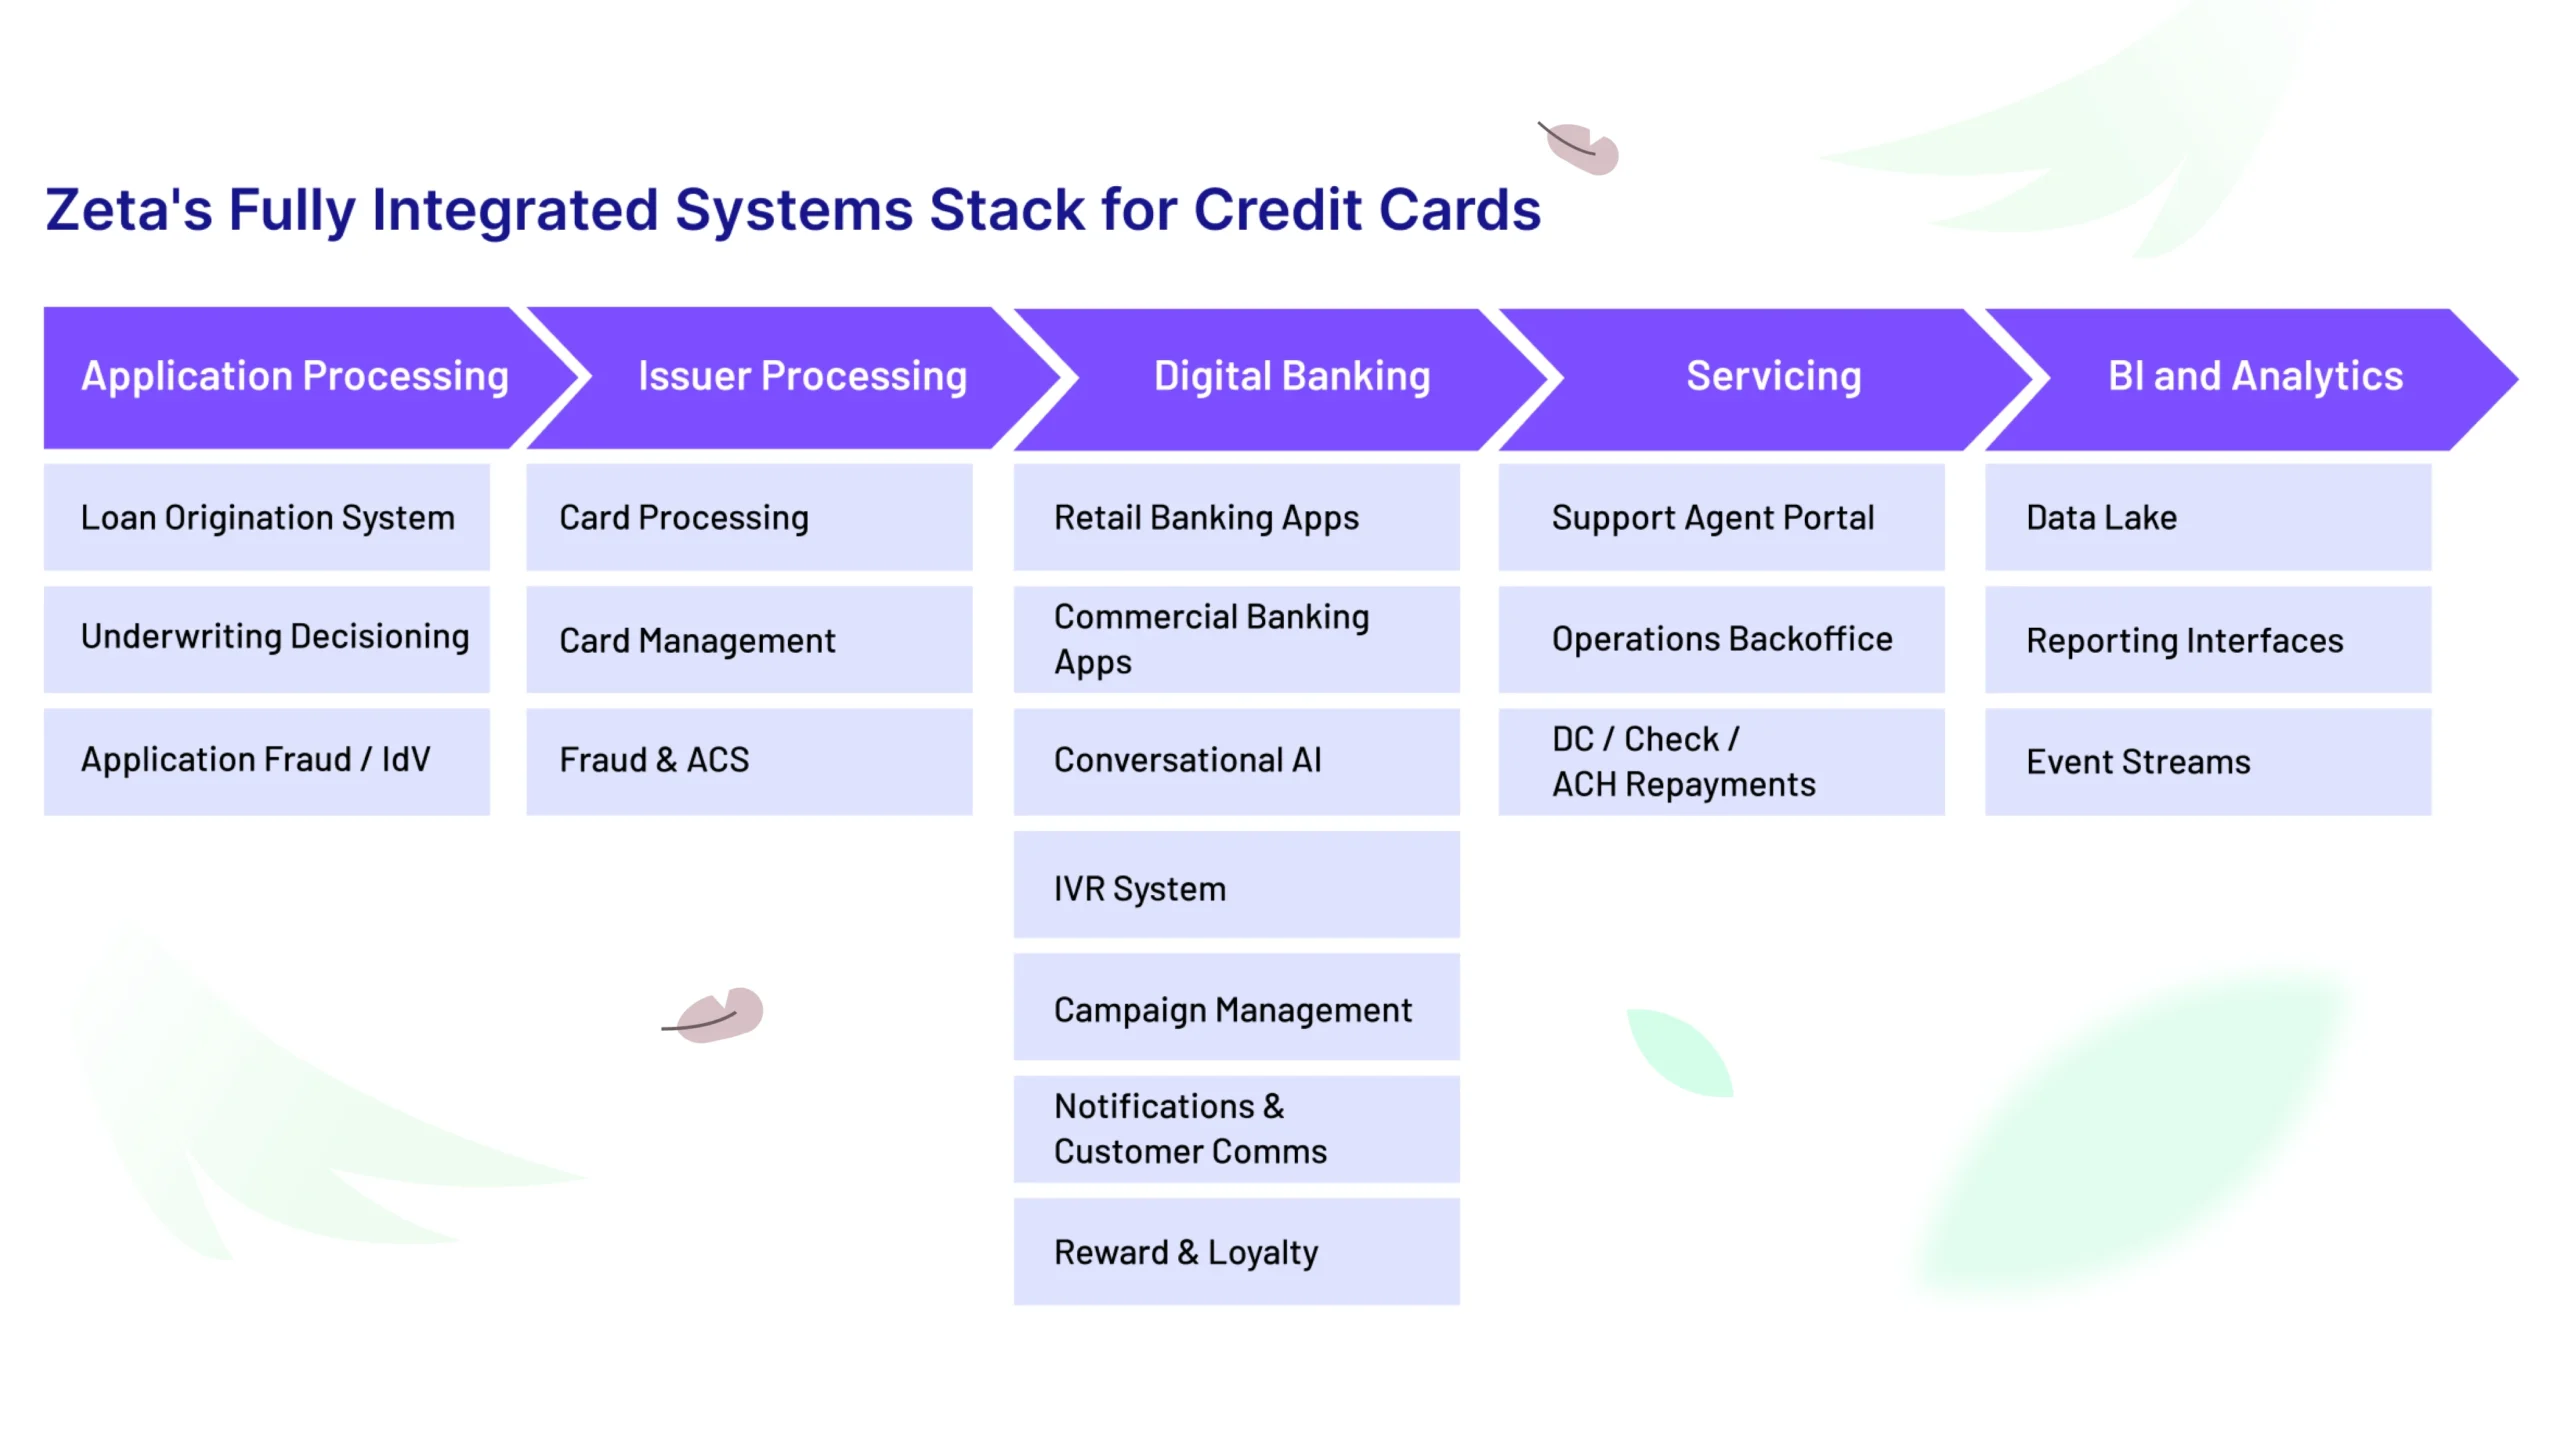 The image highlights Zeta's fully integrated processing stack used to power the launch of Sparrow’s credit card management app